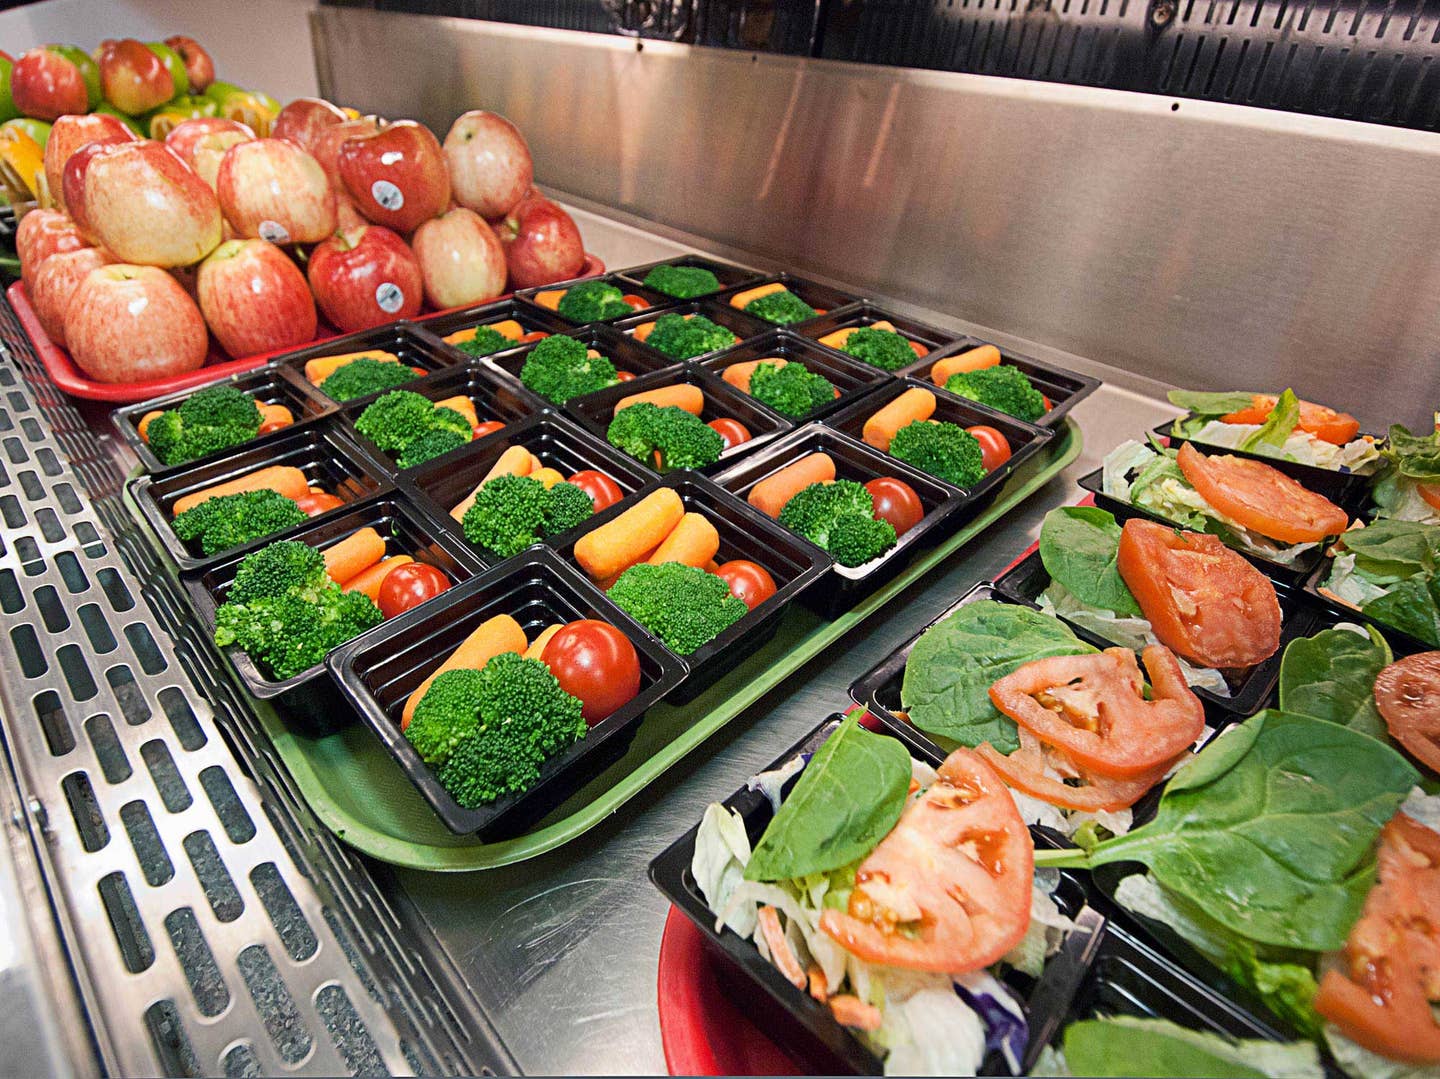 How Four South Carolina School Districts Are Shaking Up School Lunch